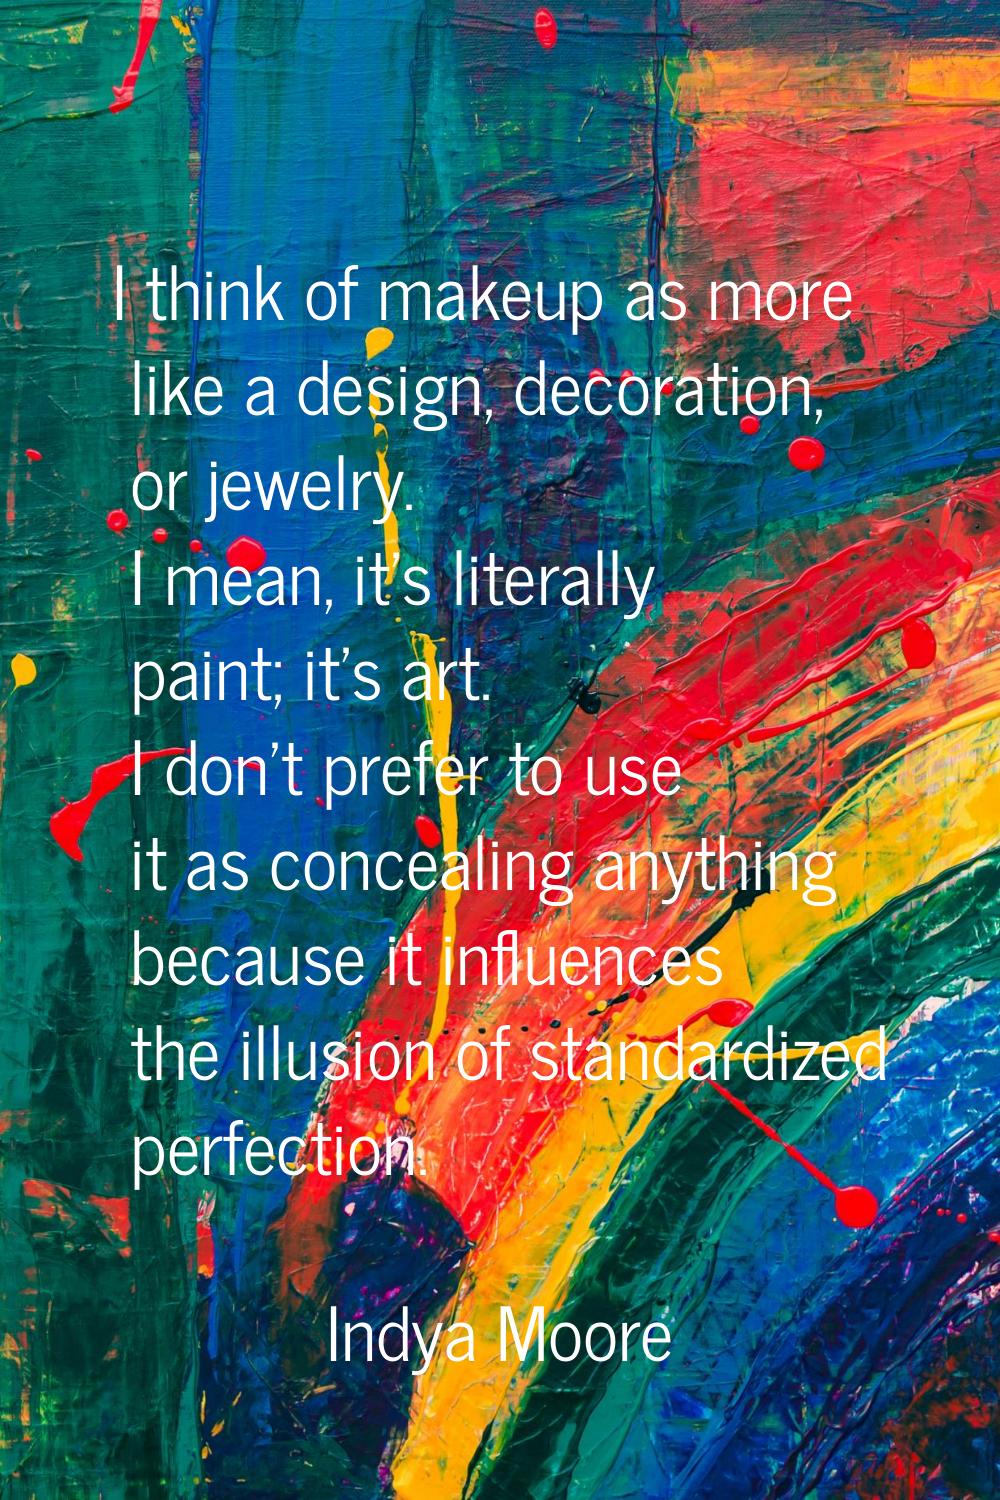 I think of makeup as more like a design, decoration, or jewelry. I mean, it's literally paint; it's